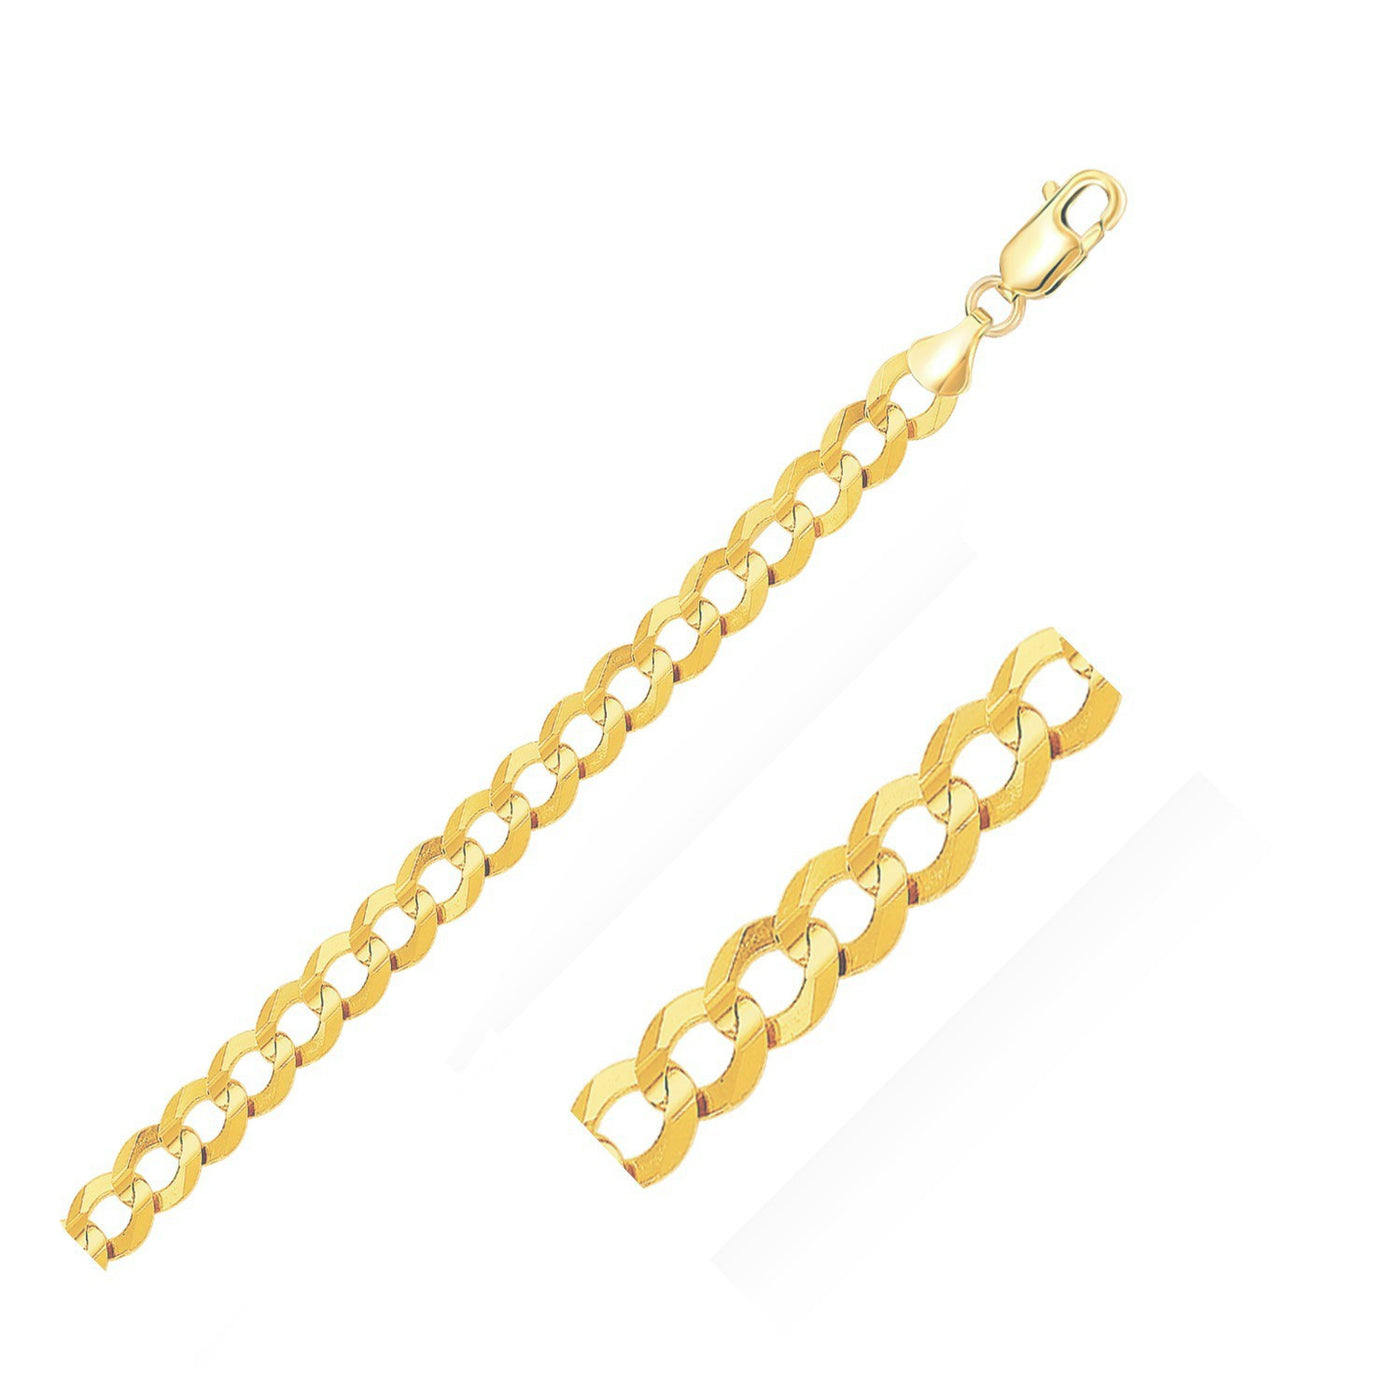 14k Yellow Gold Solid Curb Chain 10mm